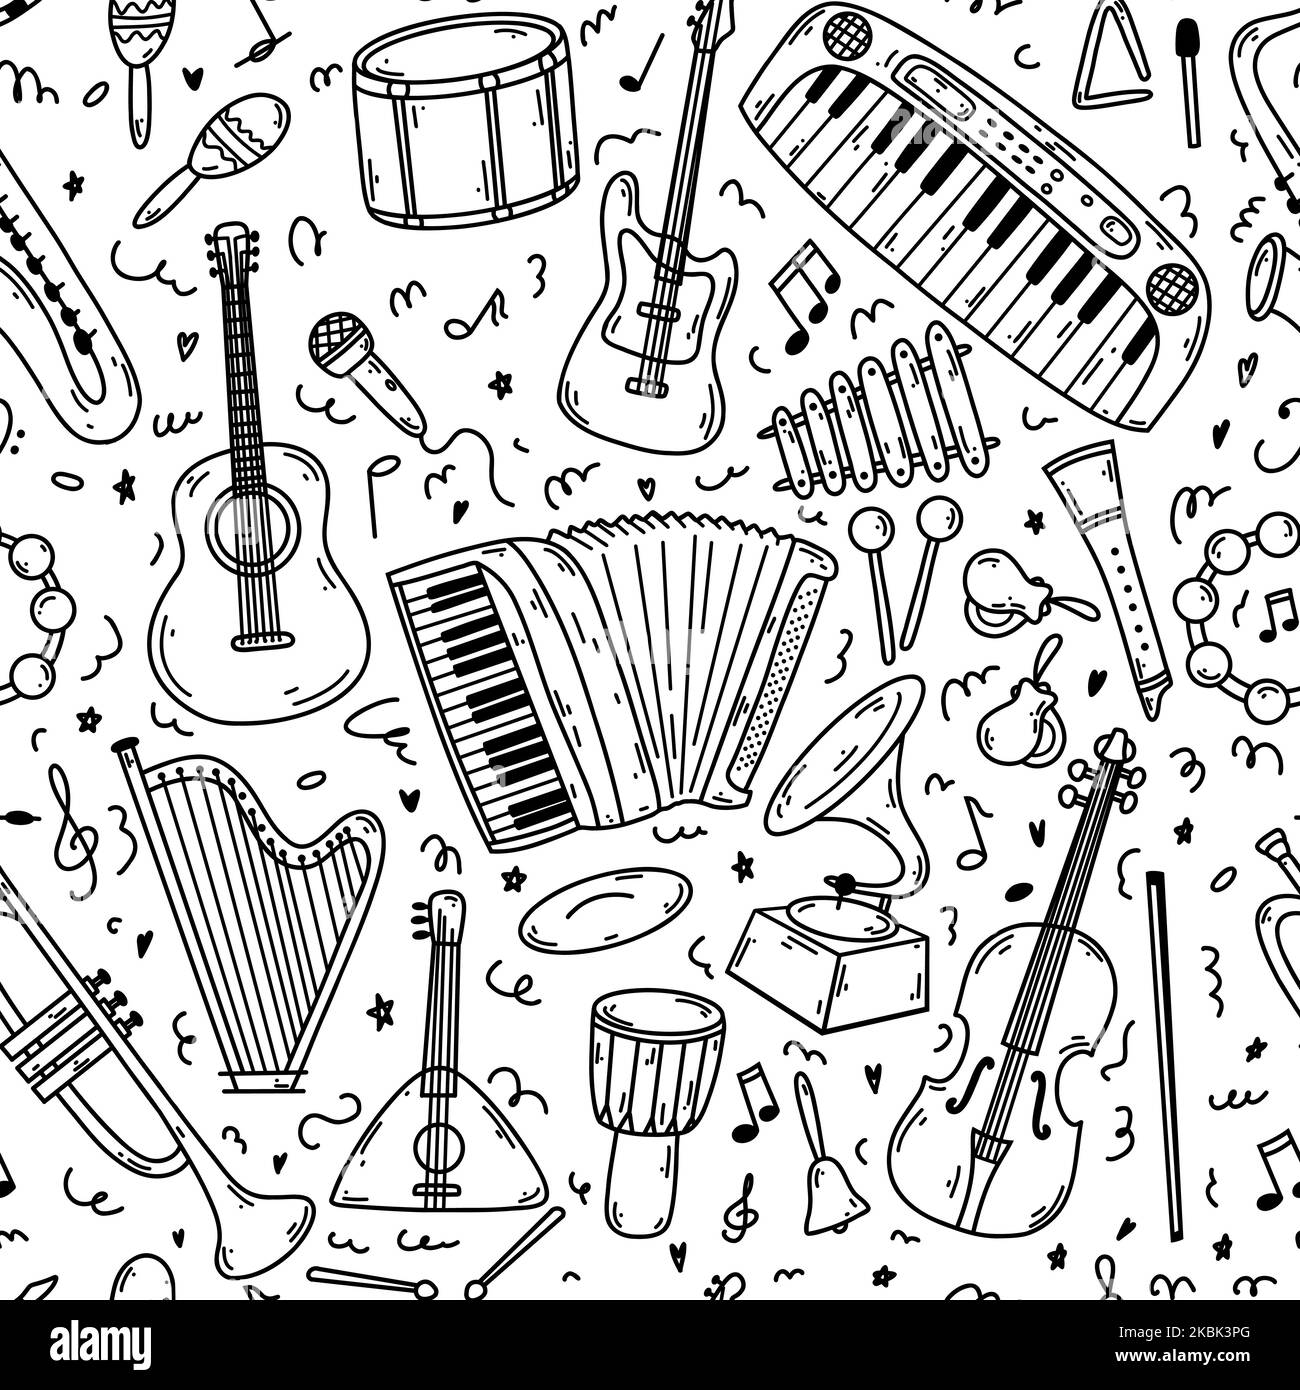 Seamless pattern with hand drawn doodle musical instruments. Vector sketch illustration set, black outline art collection for web design, icon, print, Stock Vector